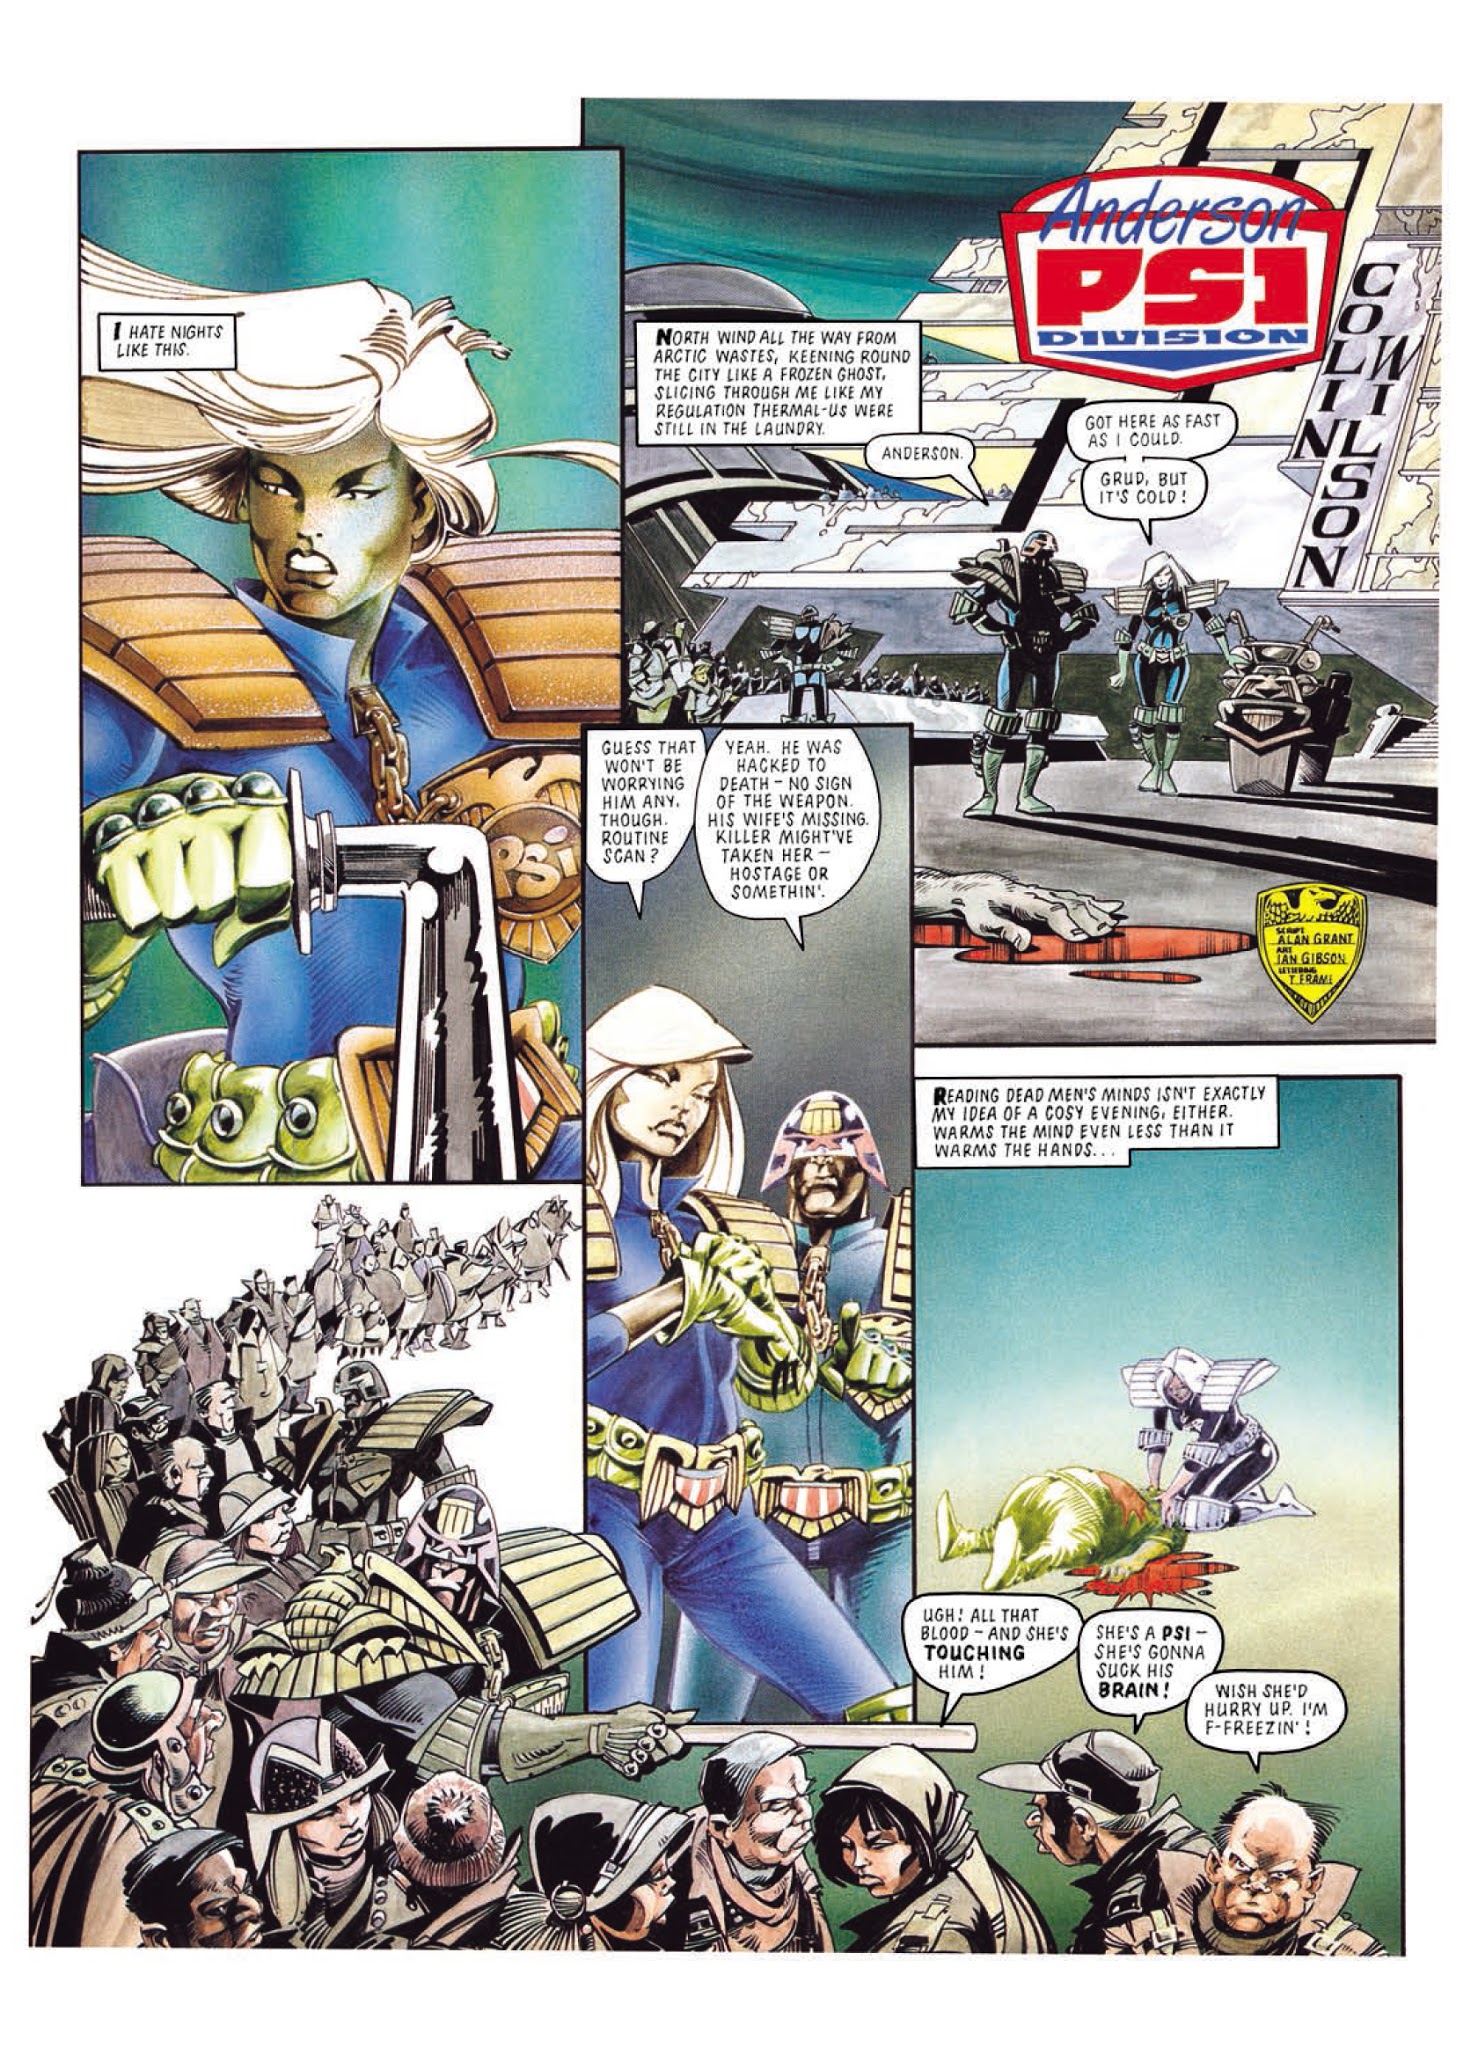 Read online Judge Anderson: The Psi Files comic -  Issue # TPB 3 - 266